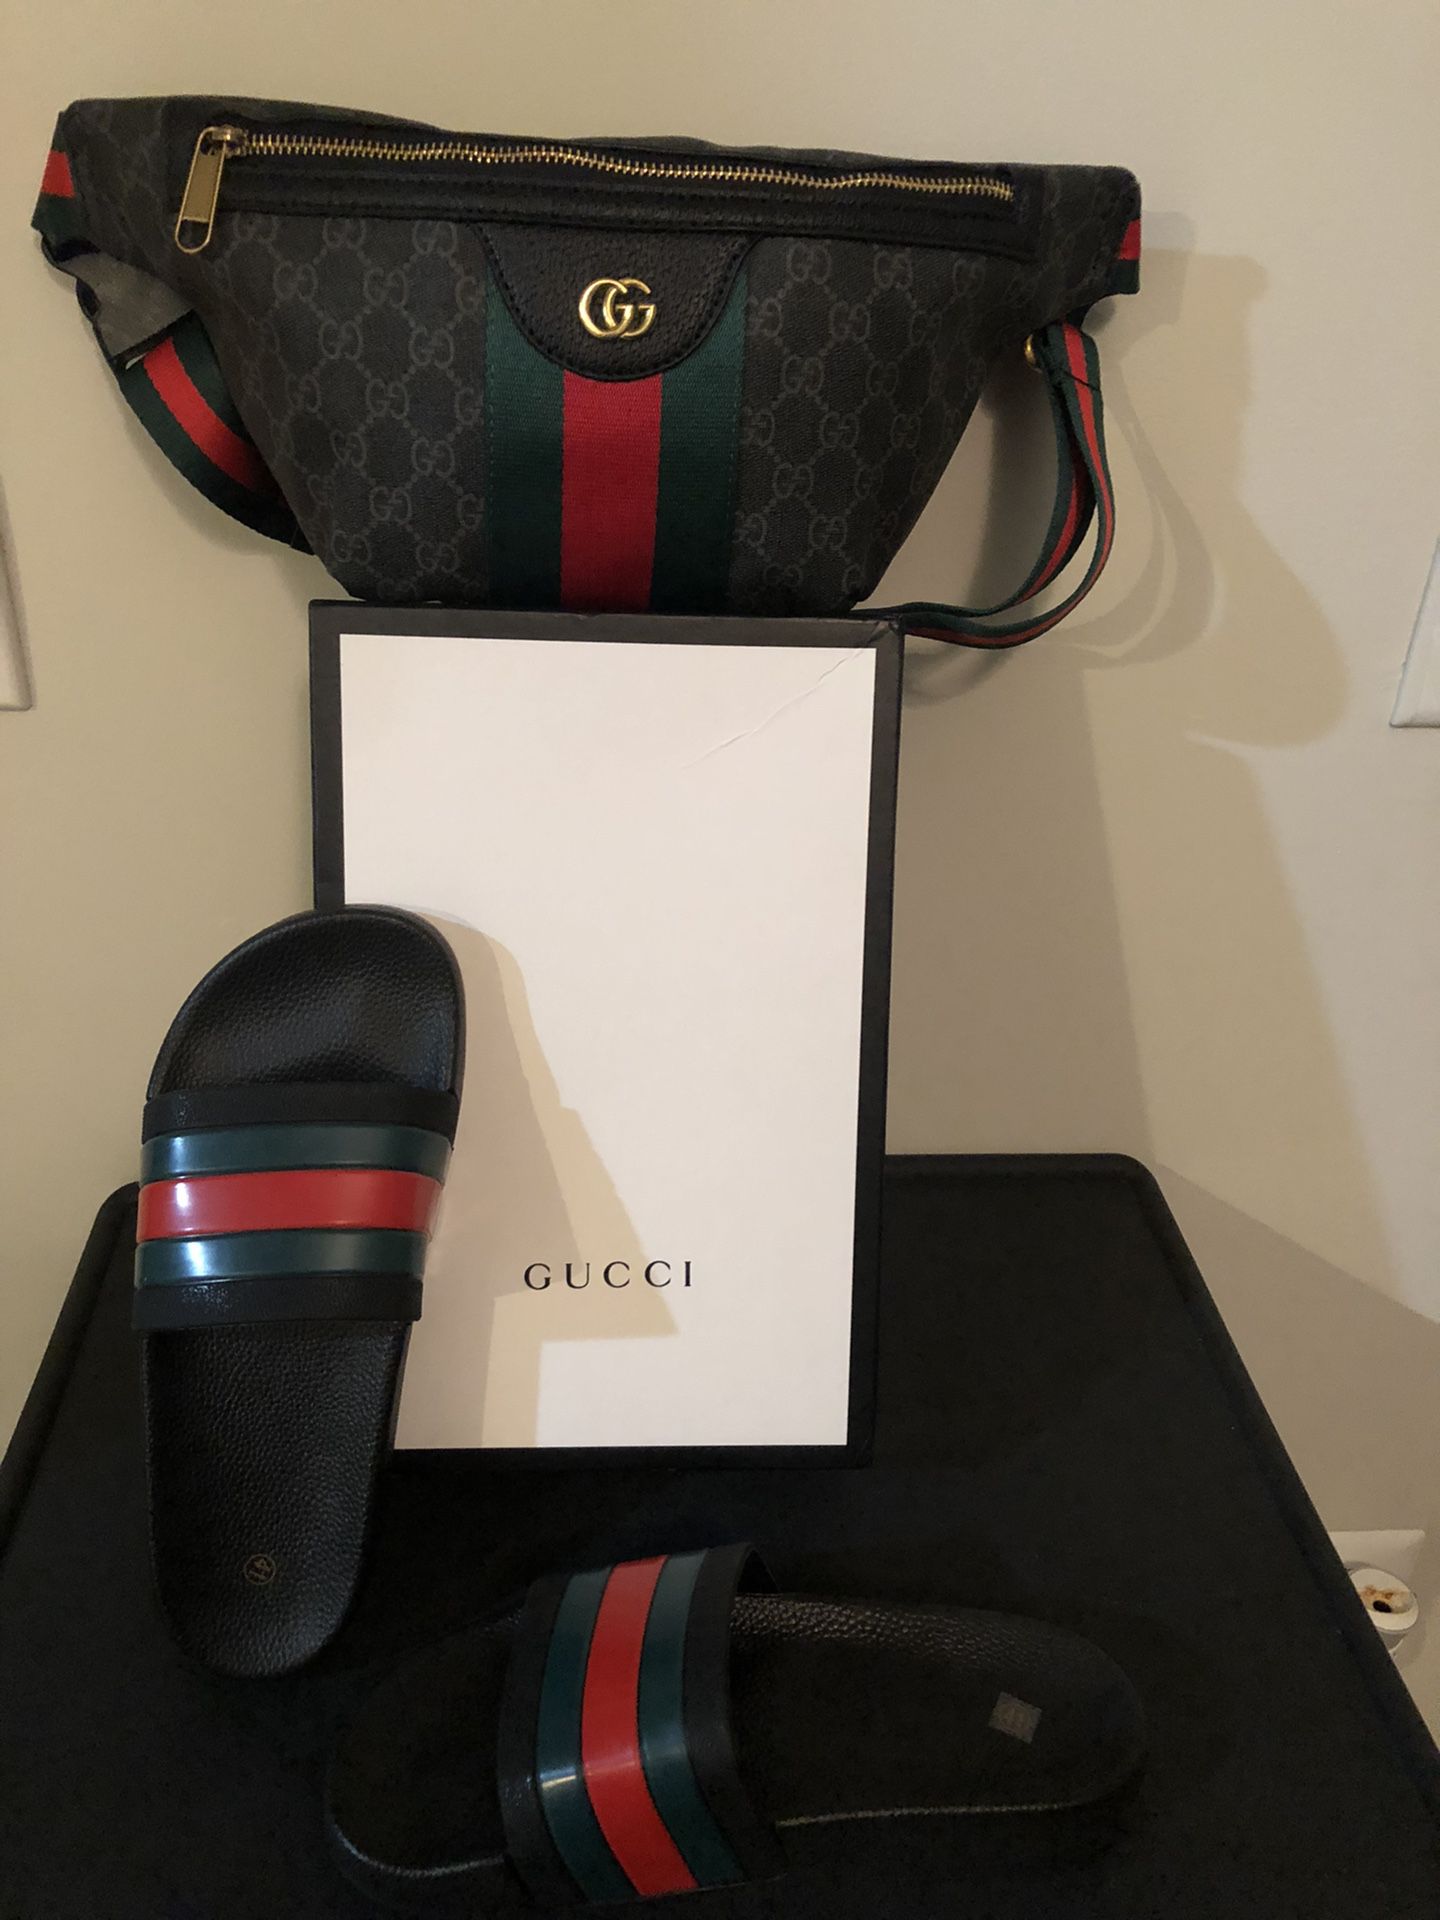 Gucci Flip Flop And Gucci Fanny Pack